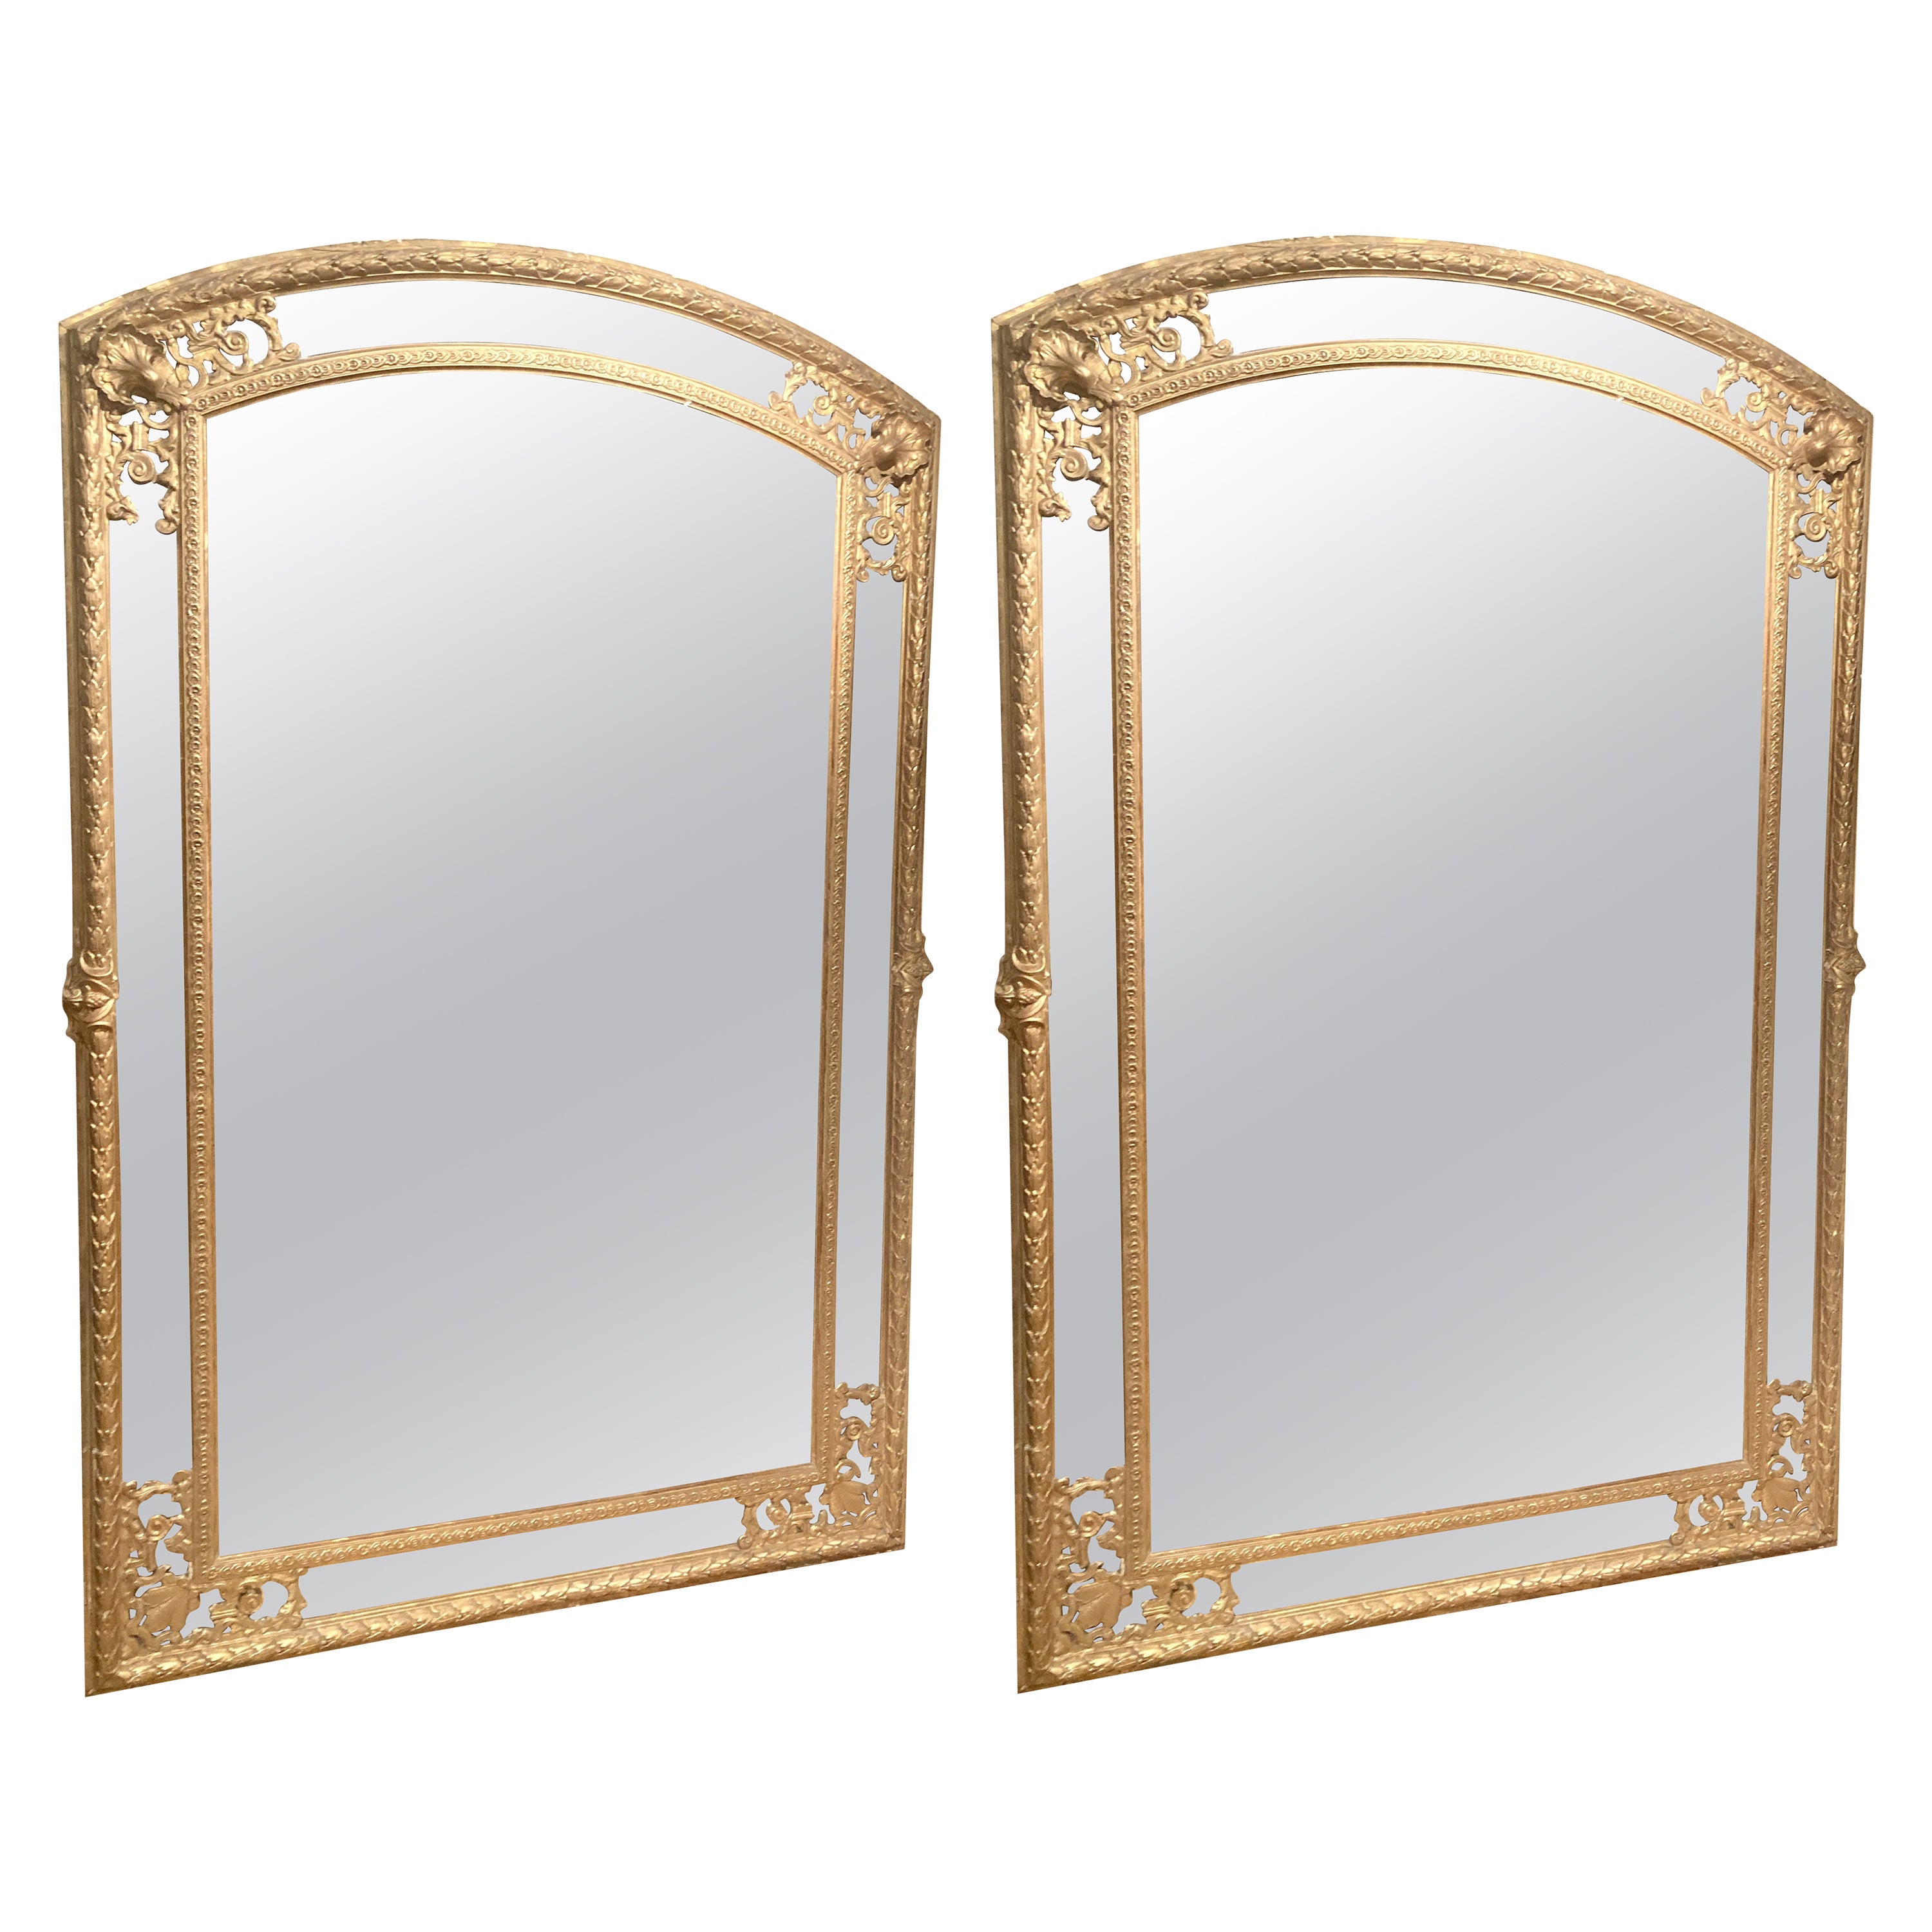 Antique French 19th Century Louis XV Style Full Length Giltwood Pier Mirrors For Sale